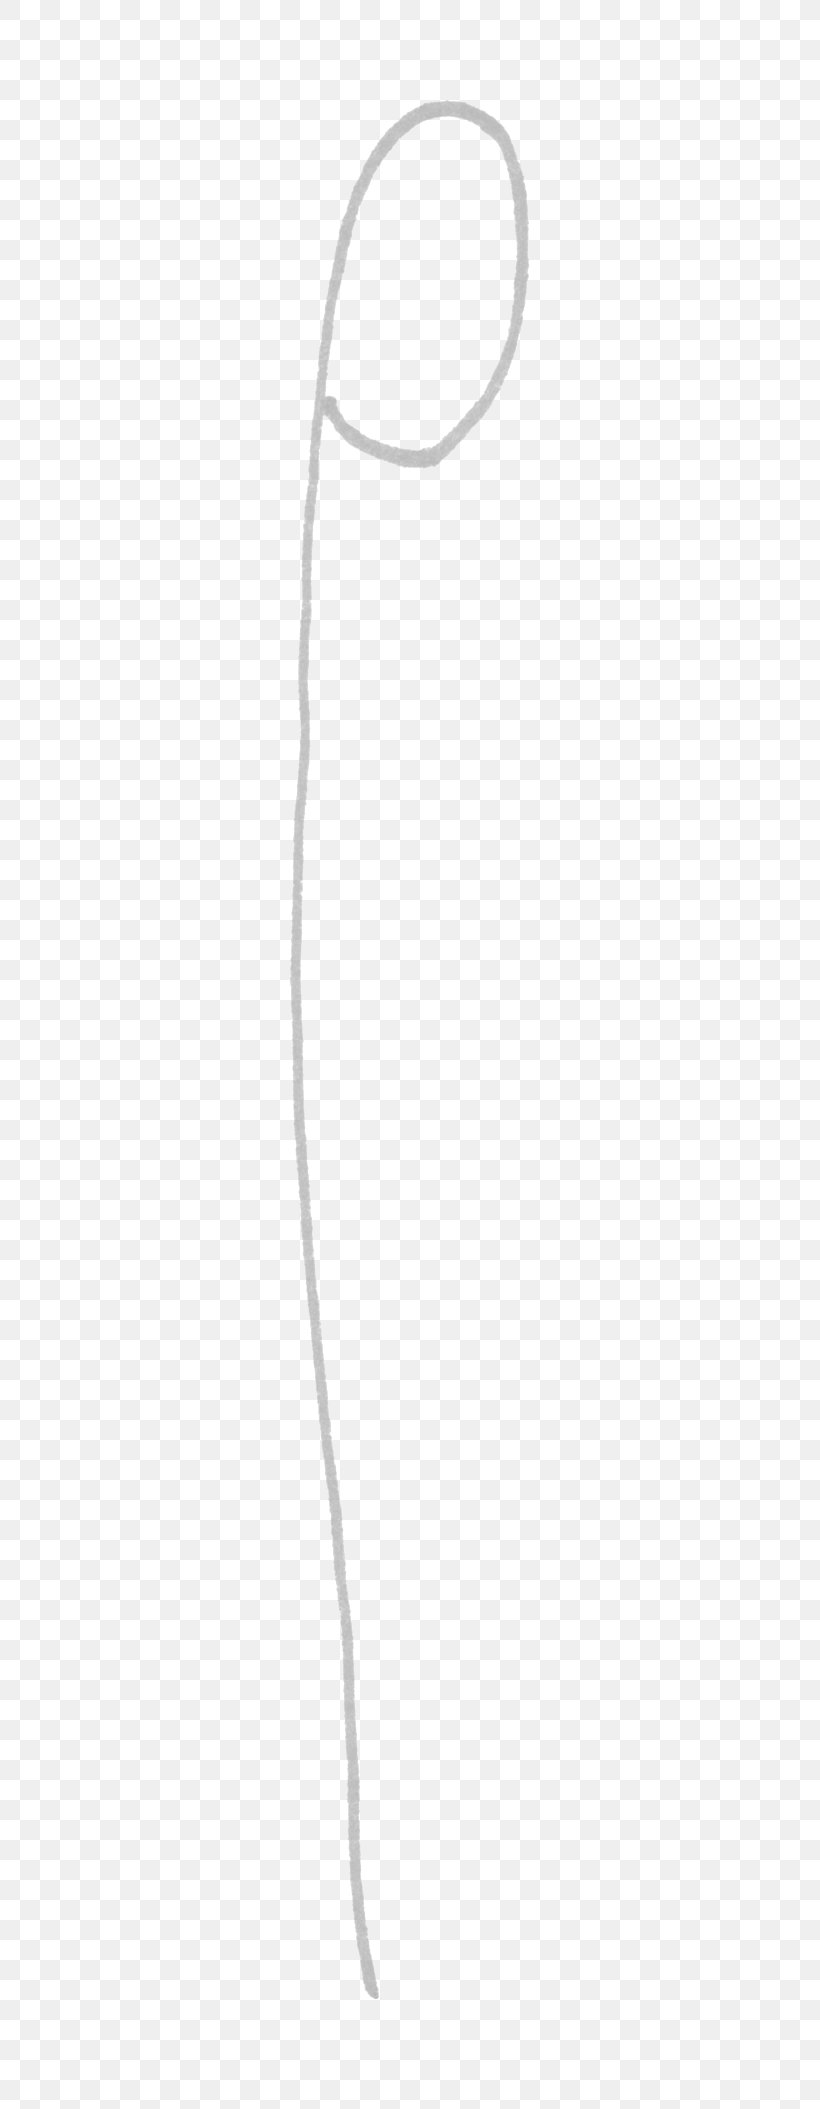 Product Neck Line, PNG, 645x2109px, Neck, Black, White Download Free